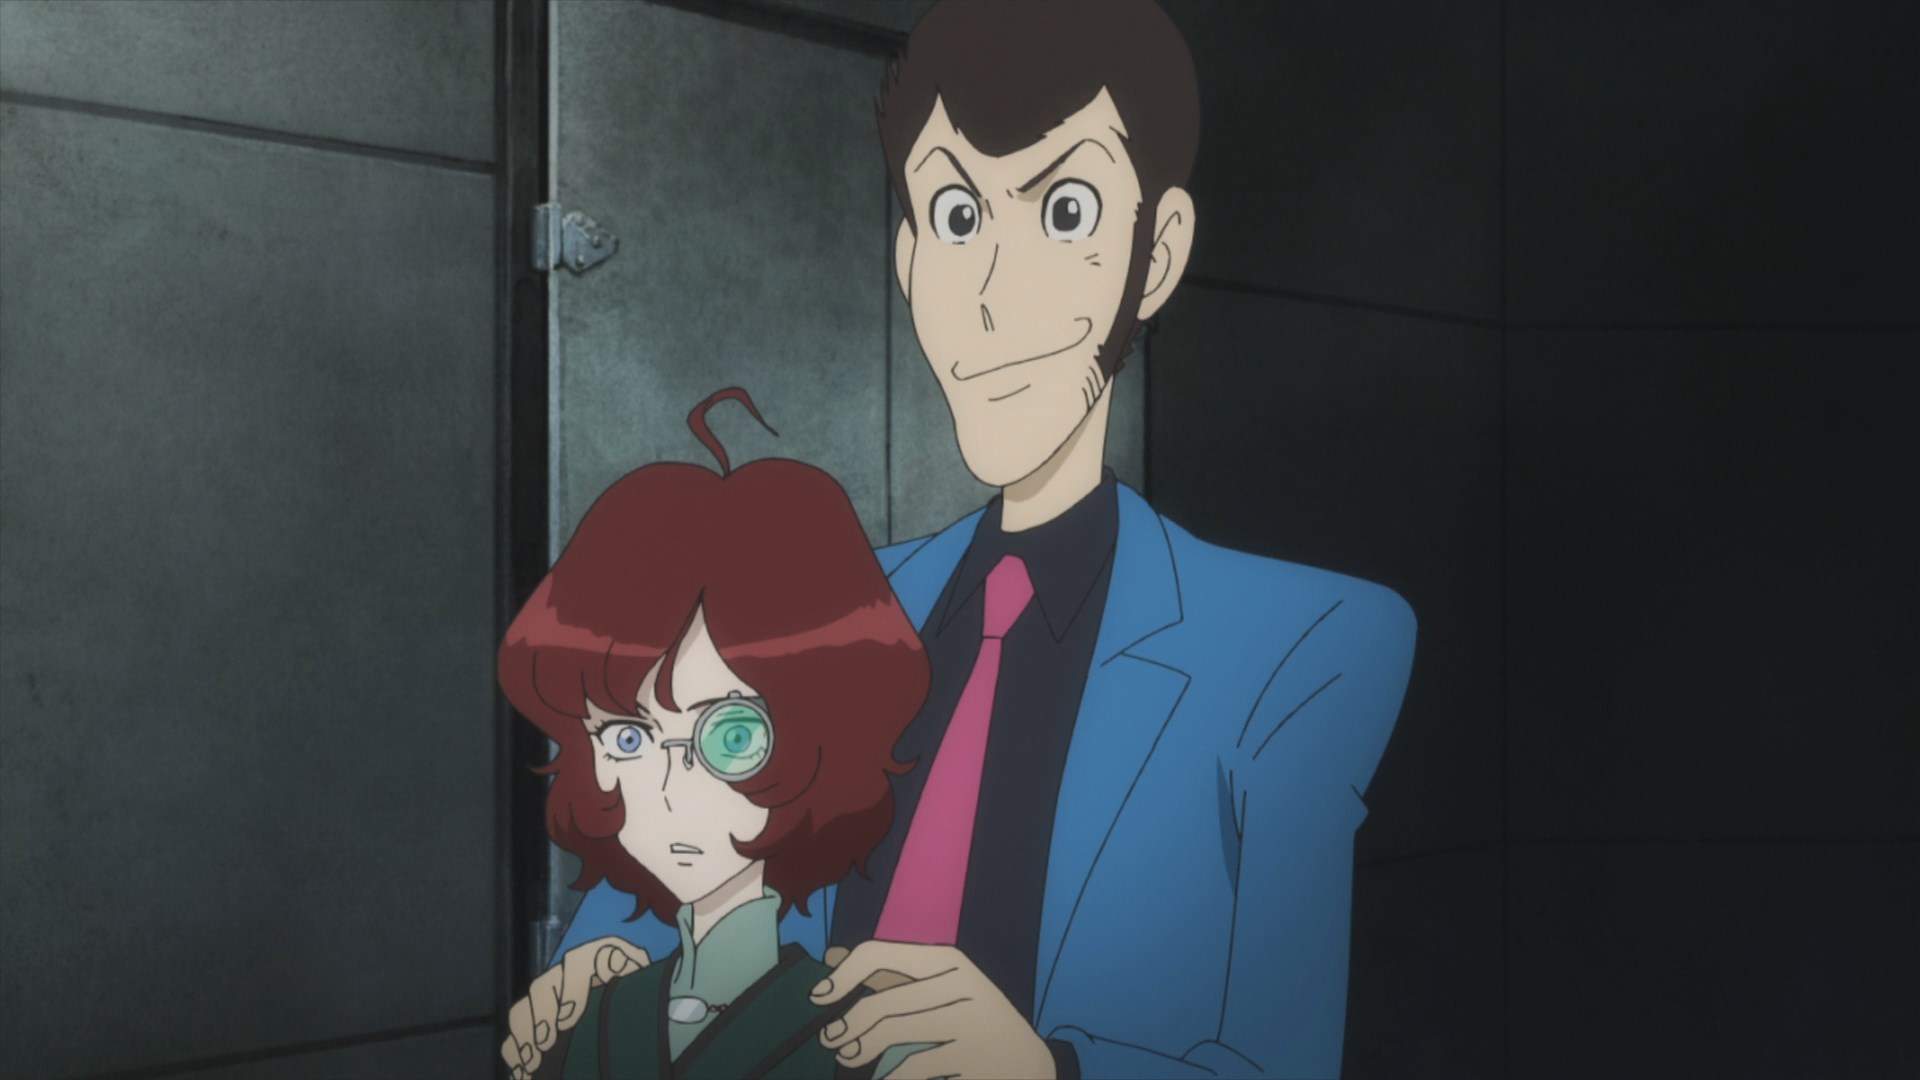 Lupin The Third Part 5 16 End Of A Good Arc Astronerdboy S Anime Manga Blog Astronerdboy S Anime Manga Blog